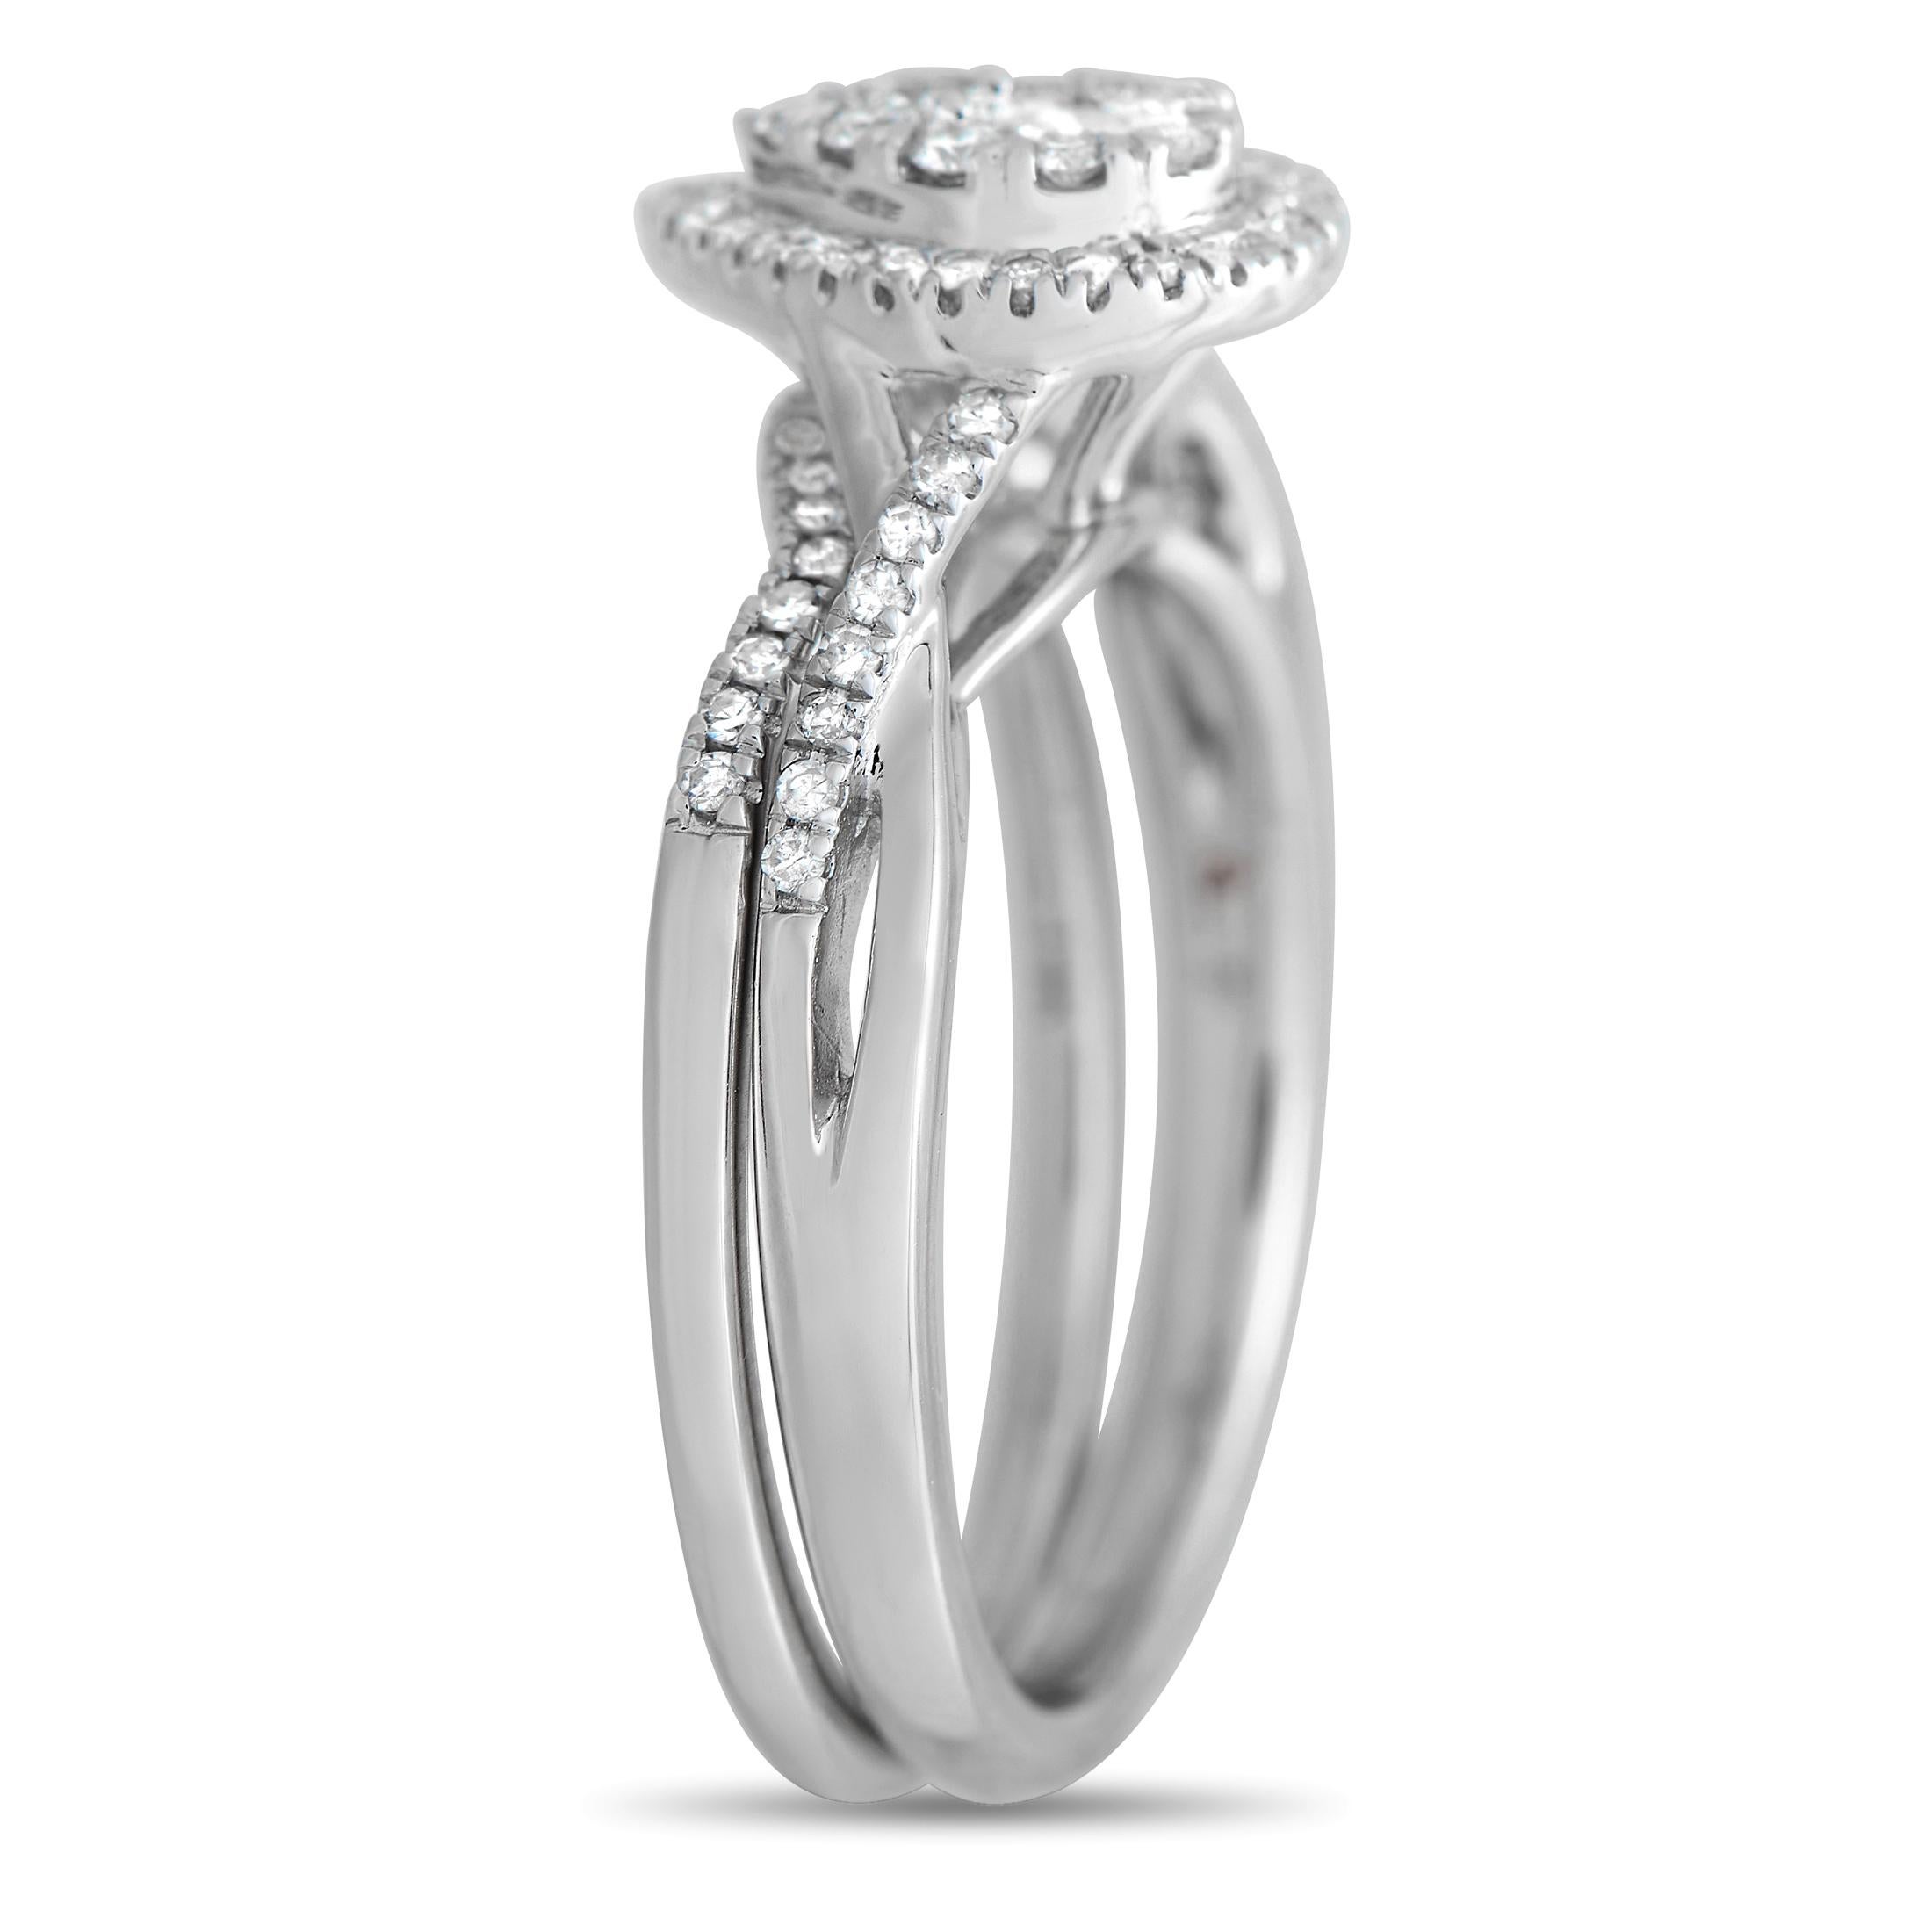 This exceptional 14K White Gold ring set will continually command attention. The sophisticated setting comes to life thanks to inset diamonds that together possess a total weight of 0.40 carats. It features two rings that have a 4mm wide band and a